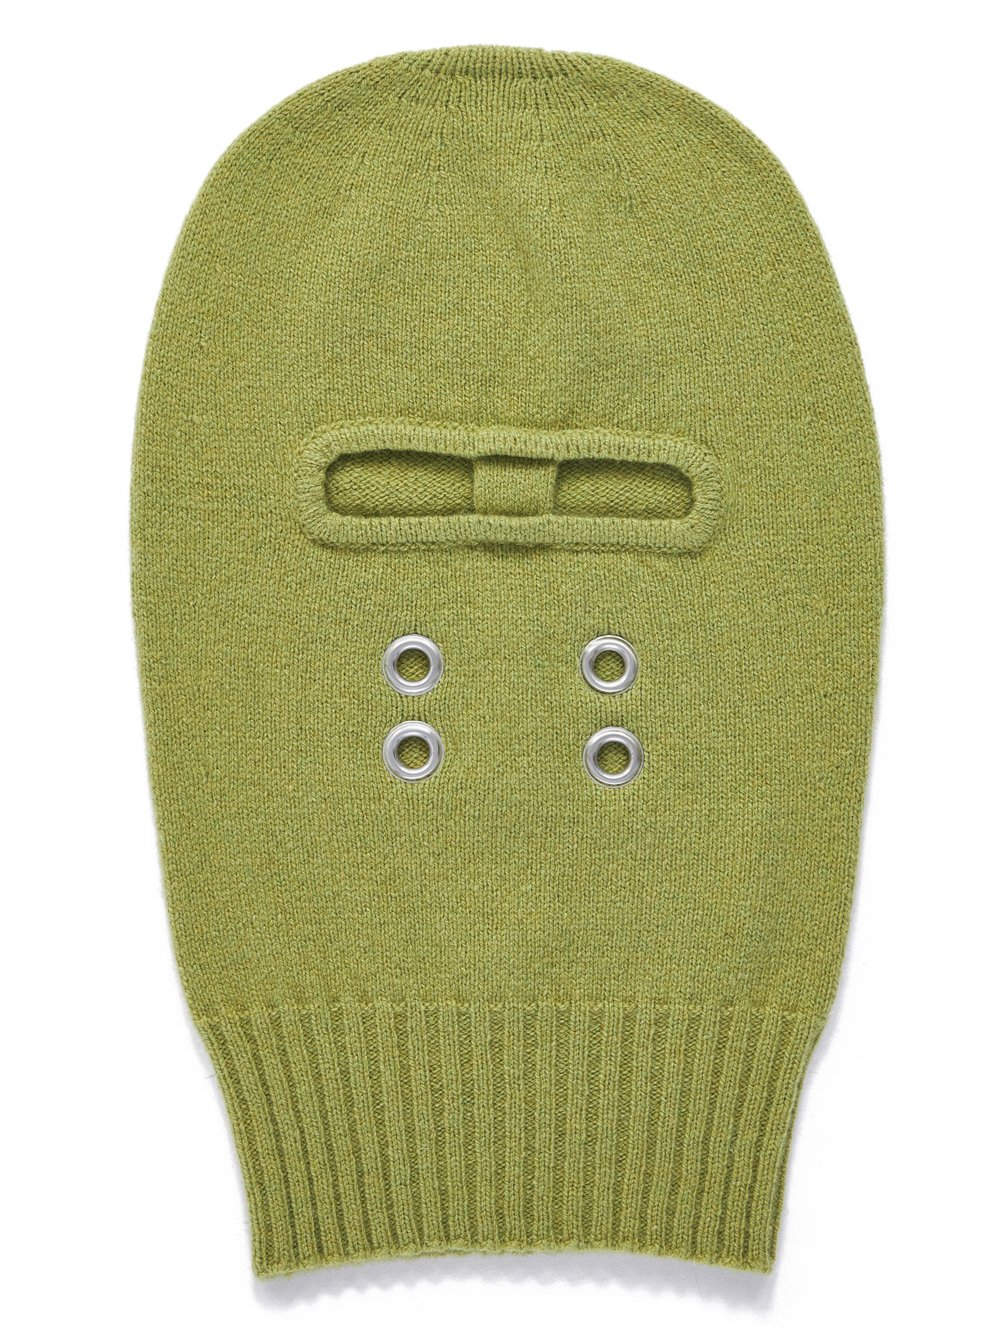 RICK OWENS FW23 LUXOR GIMP BALACLAVA IN ACID YELLOW RECYCLED CASHMERE KNIT